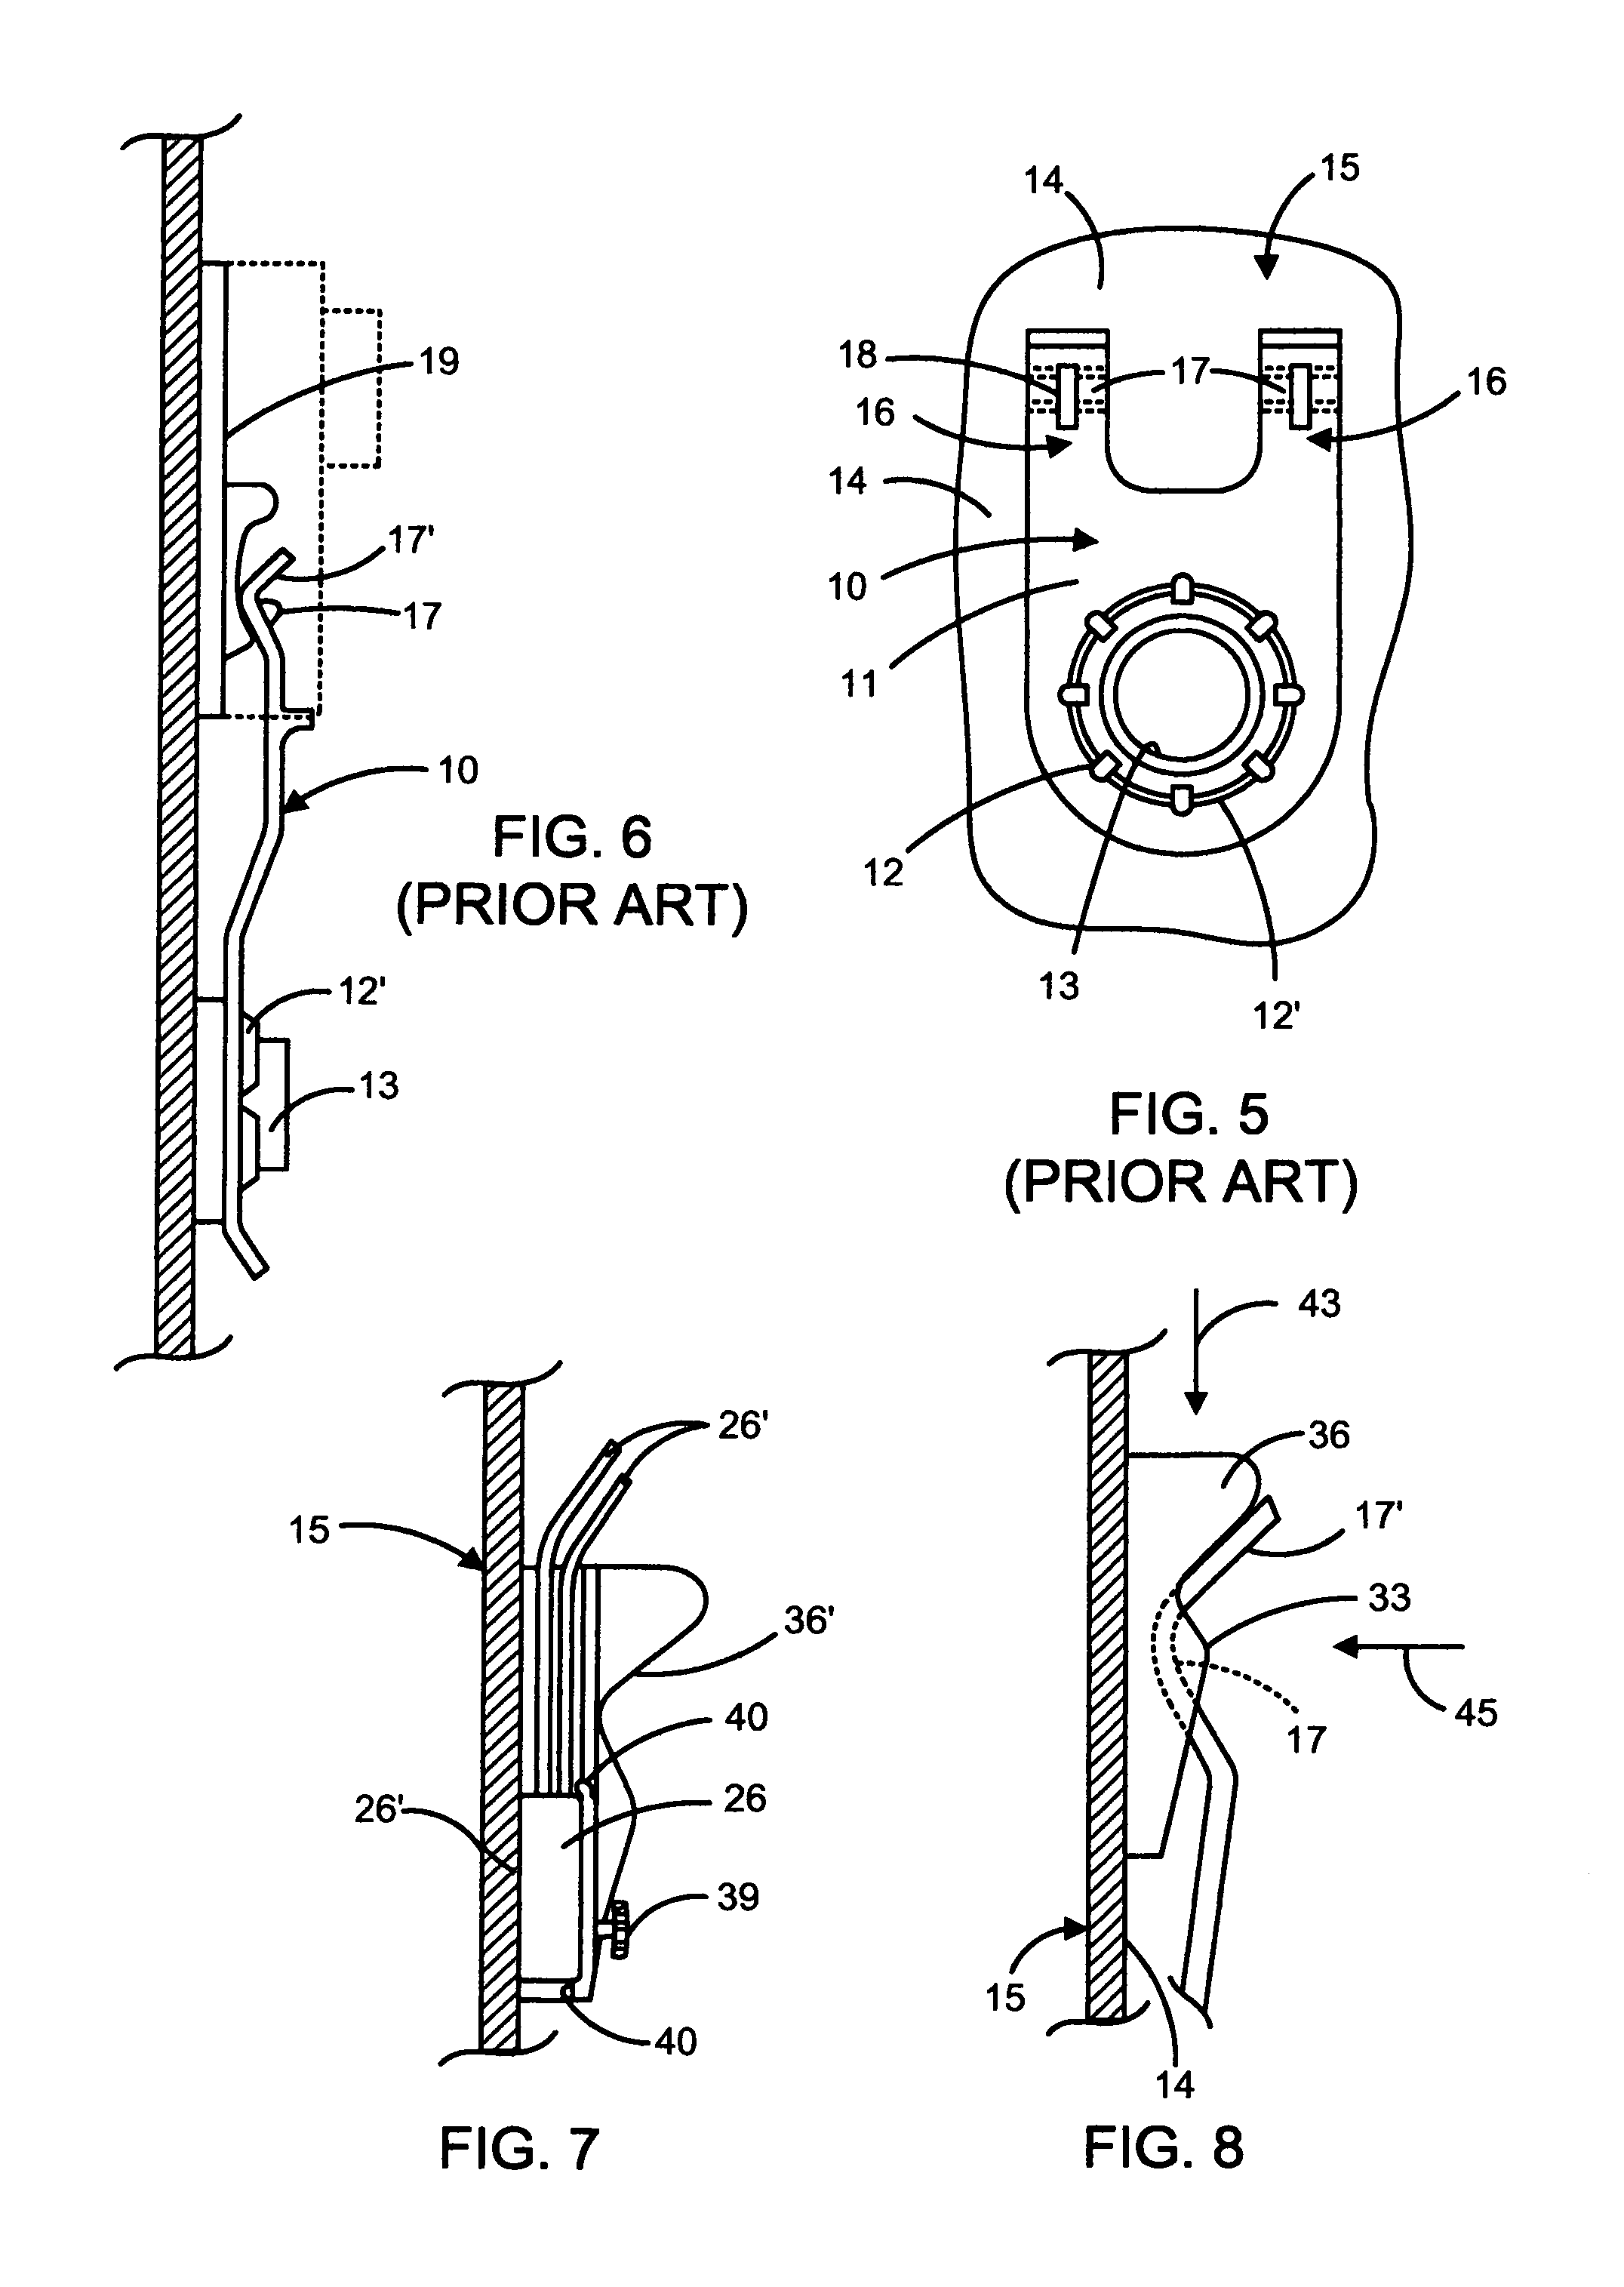 Pressure clamp adapter for mounting a thermistor on a thermostat control bracket